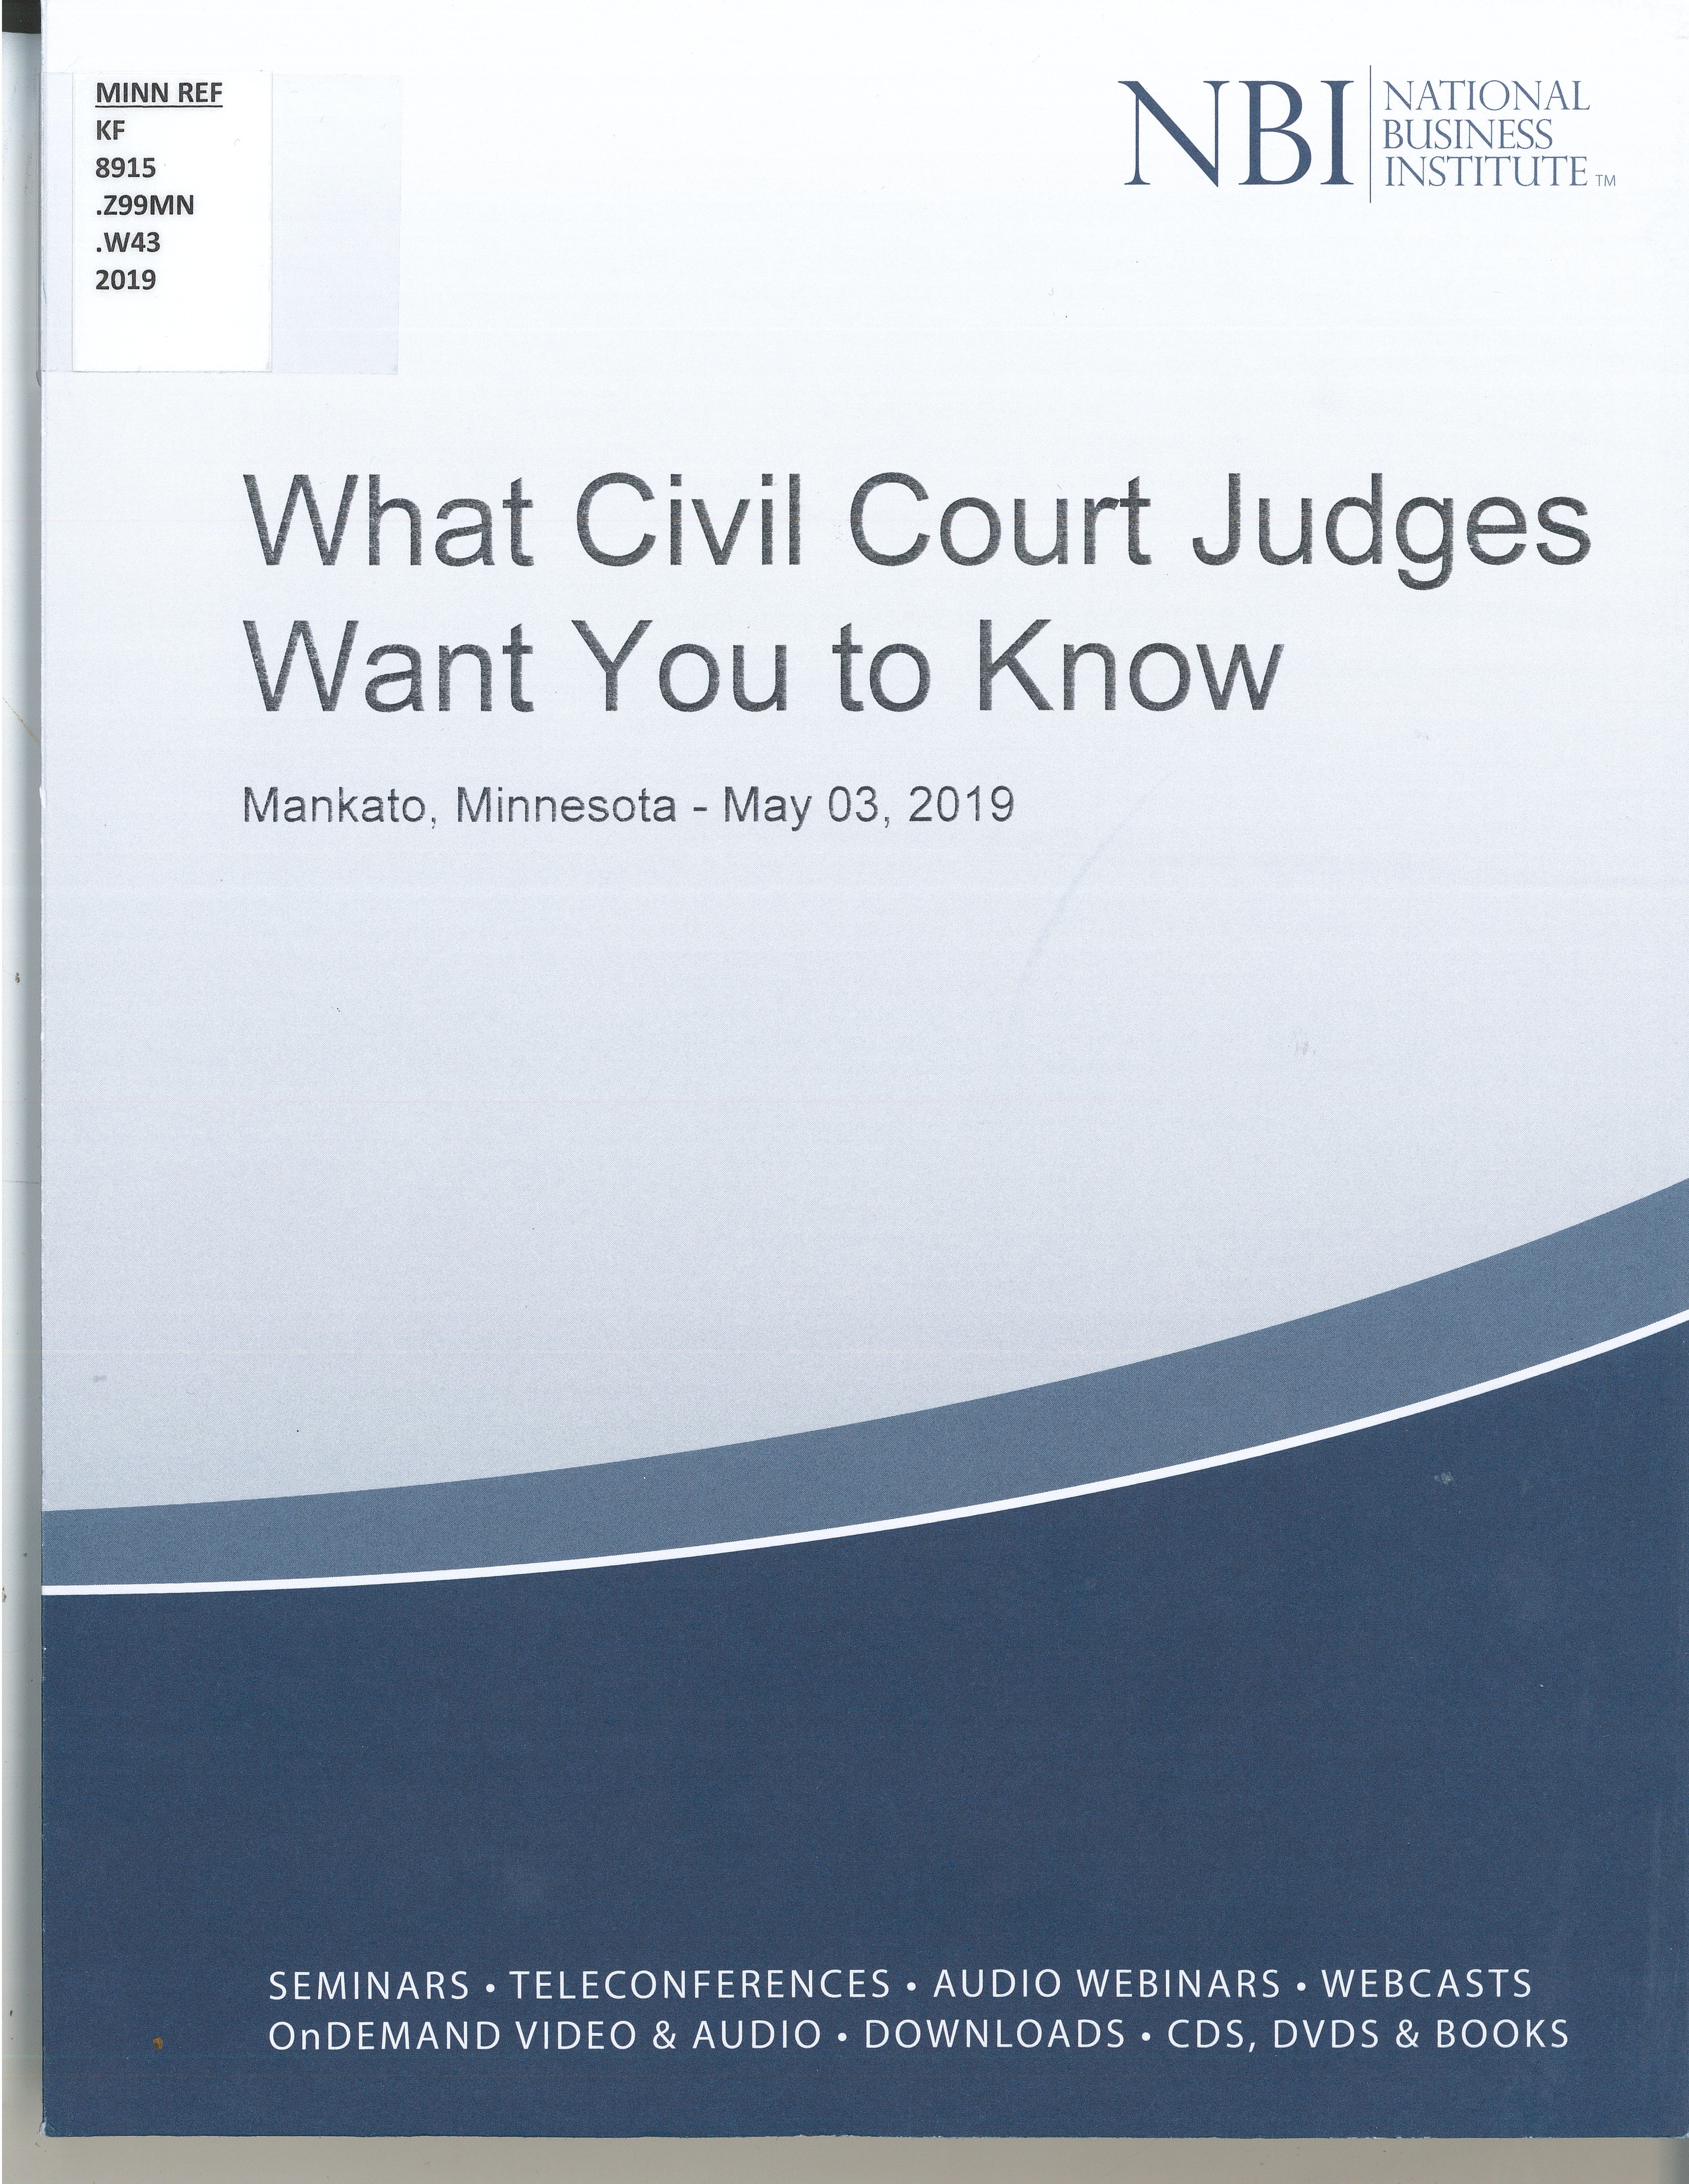 What Civil Court Judges Want You To Know